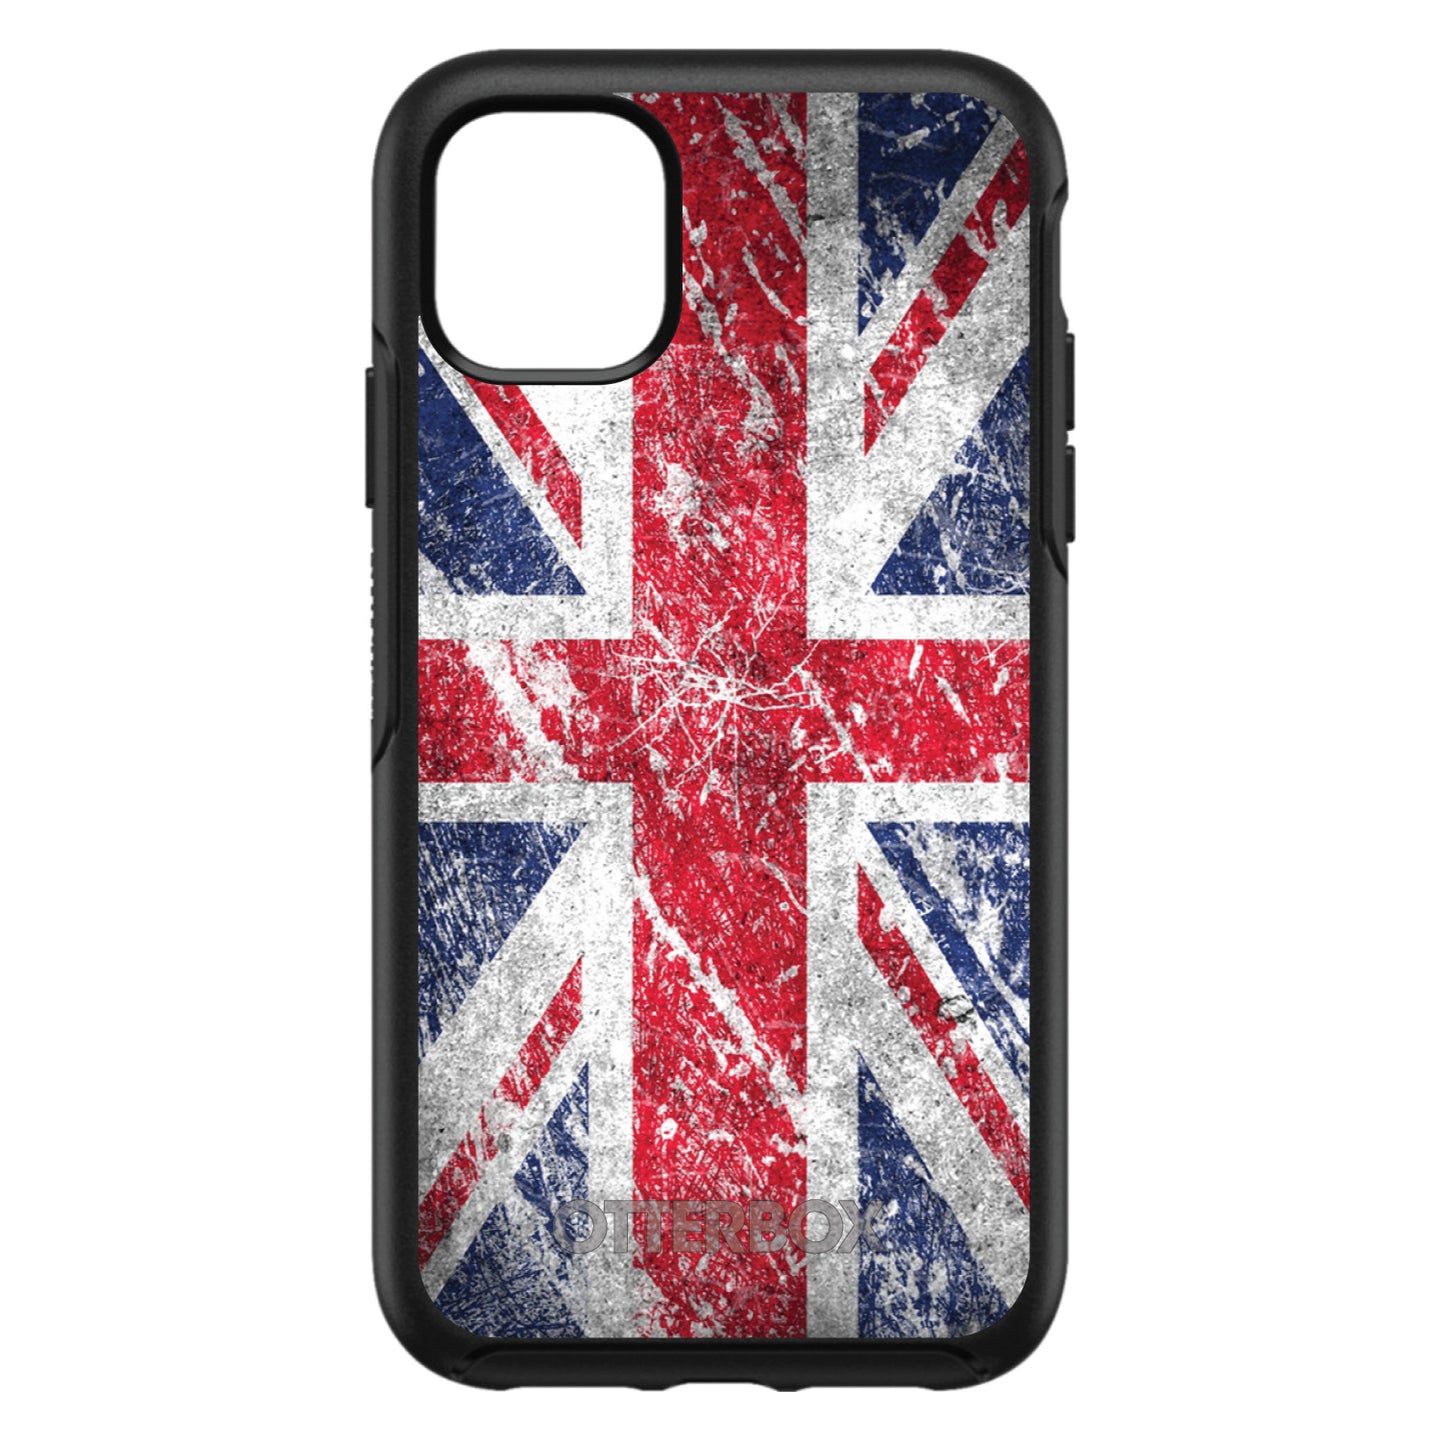 DistinctInk™ OtterBox Symmetry Series Case for Apple iPhone / Samsung Galaxy / Google Pixel - Red White Blue British Flag Weathered